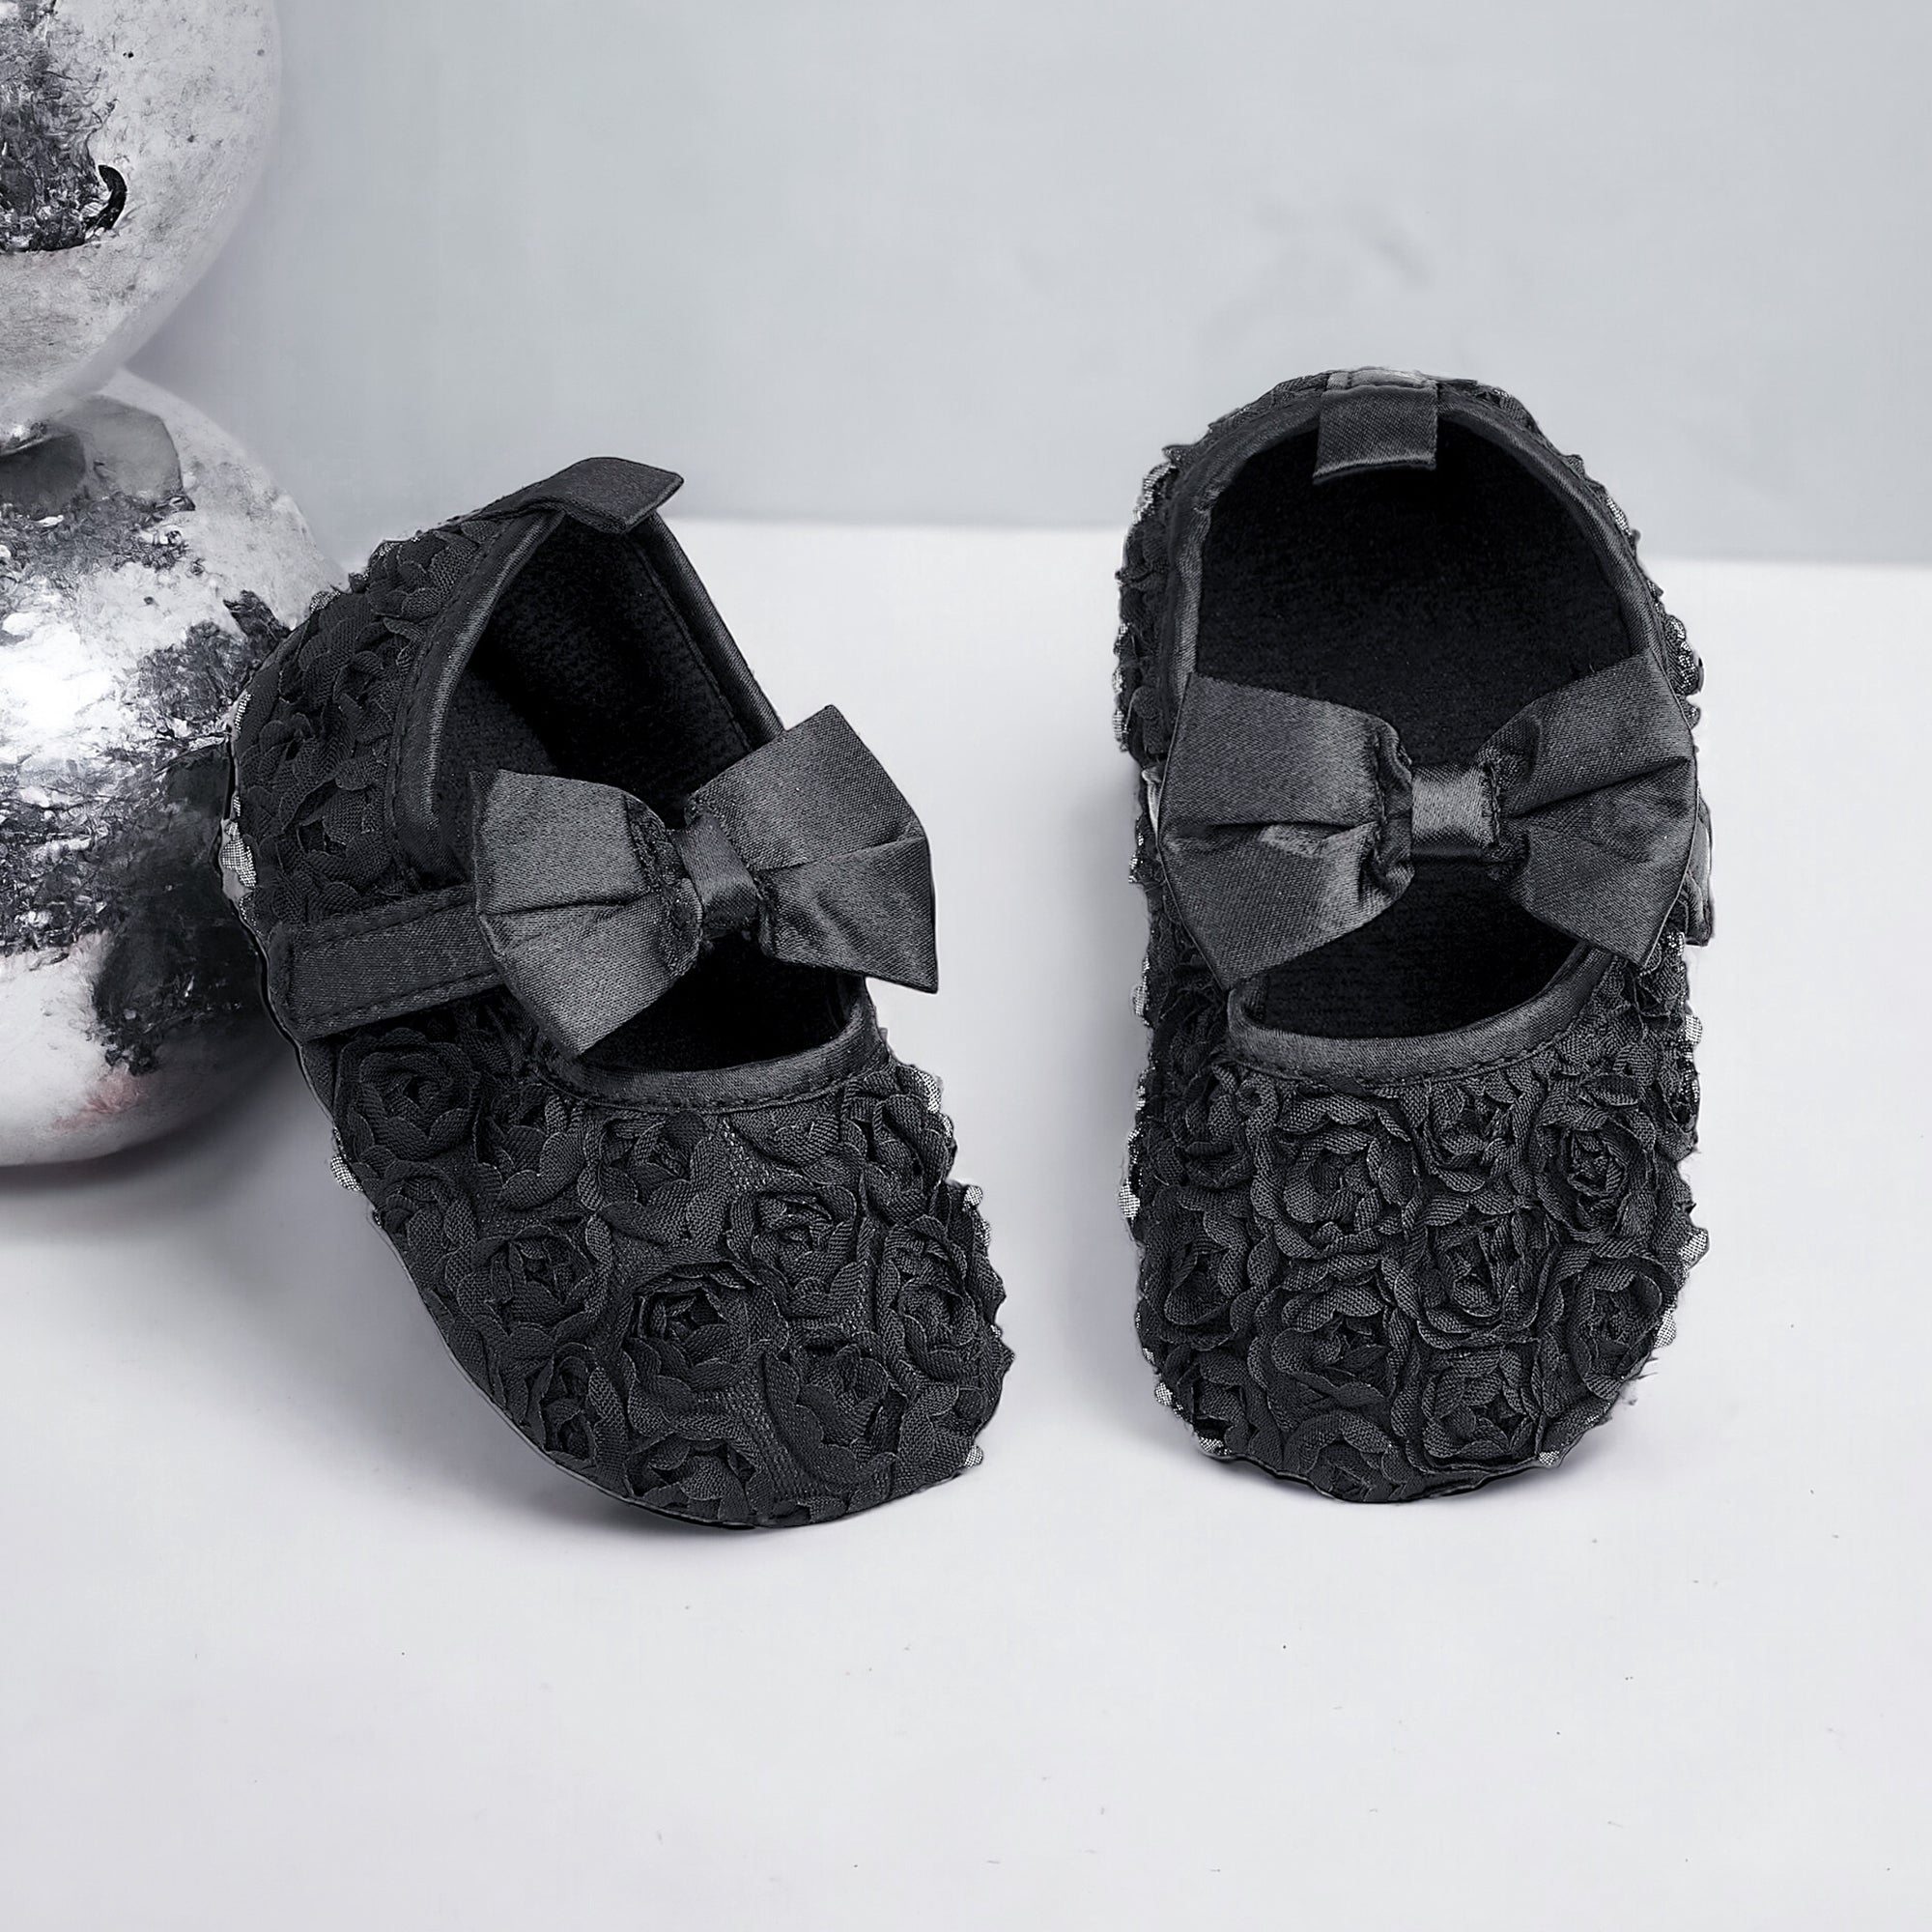 Baby Moo Big Bow Floral Lace Elastic Strap Ballerina Booties - Black